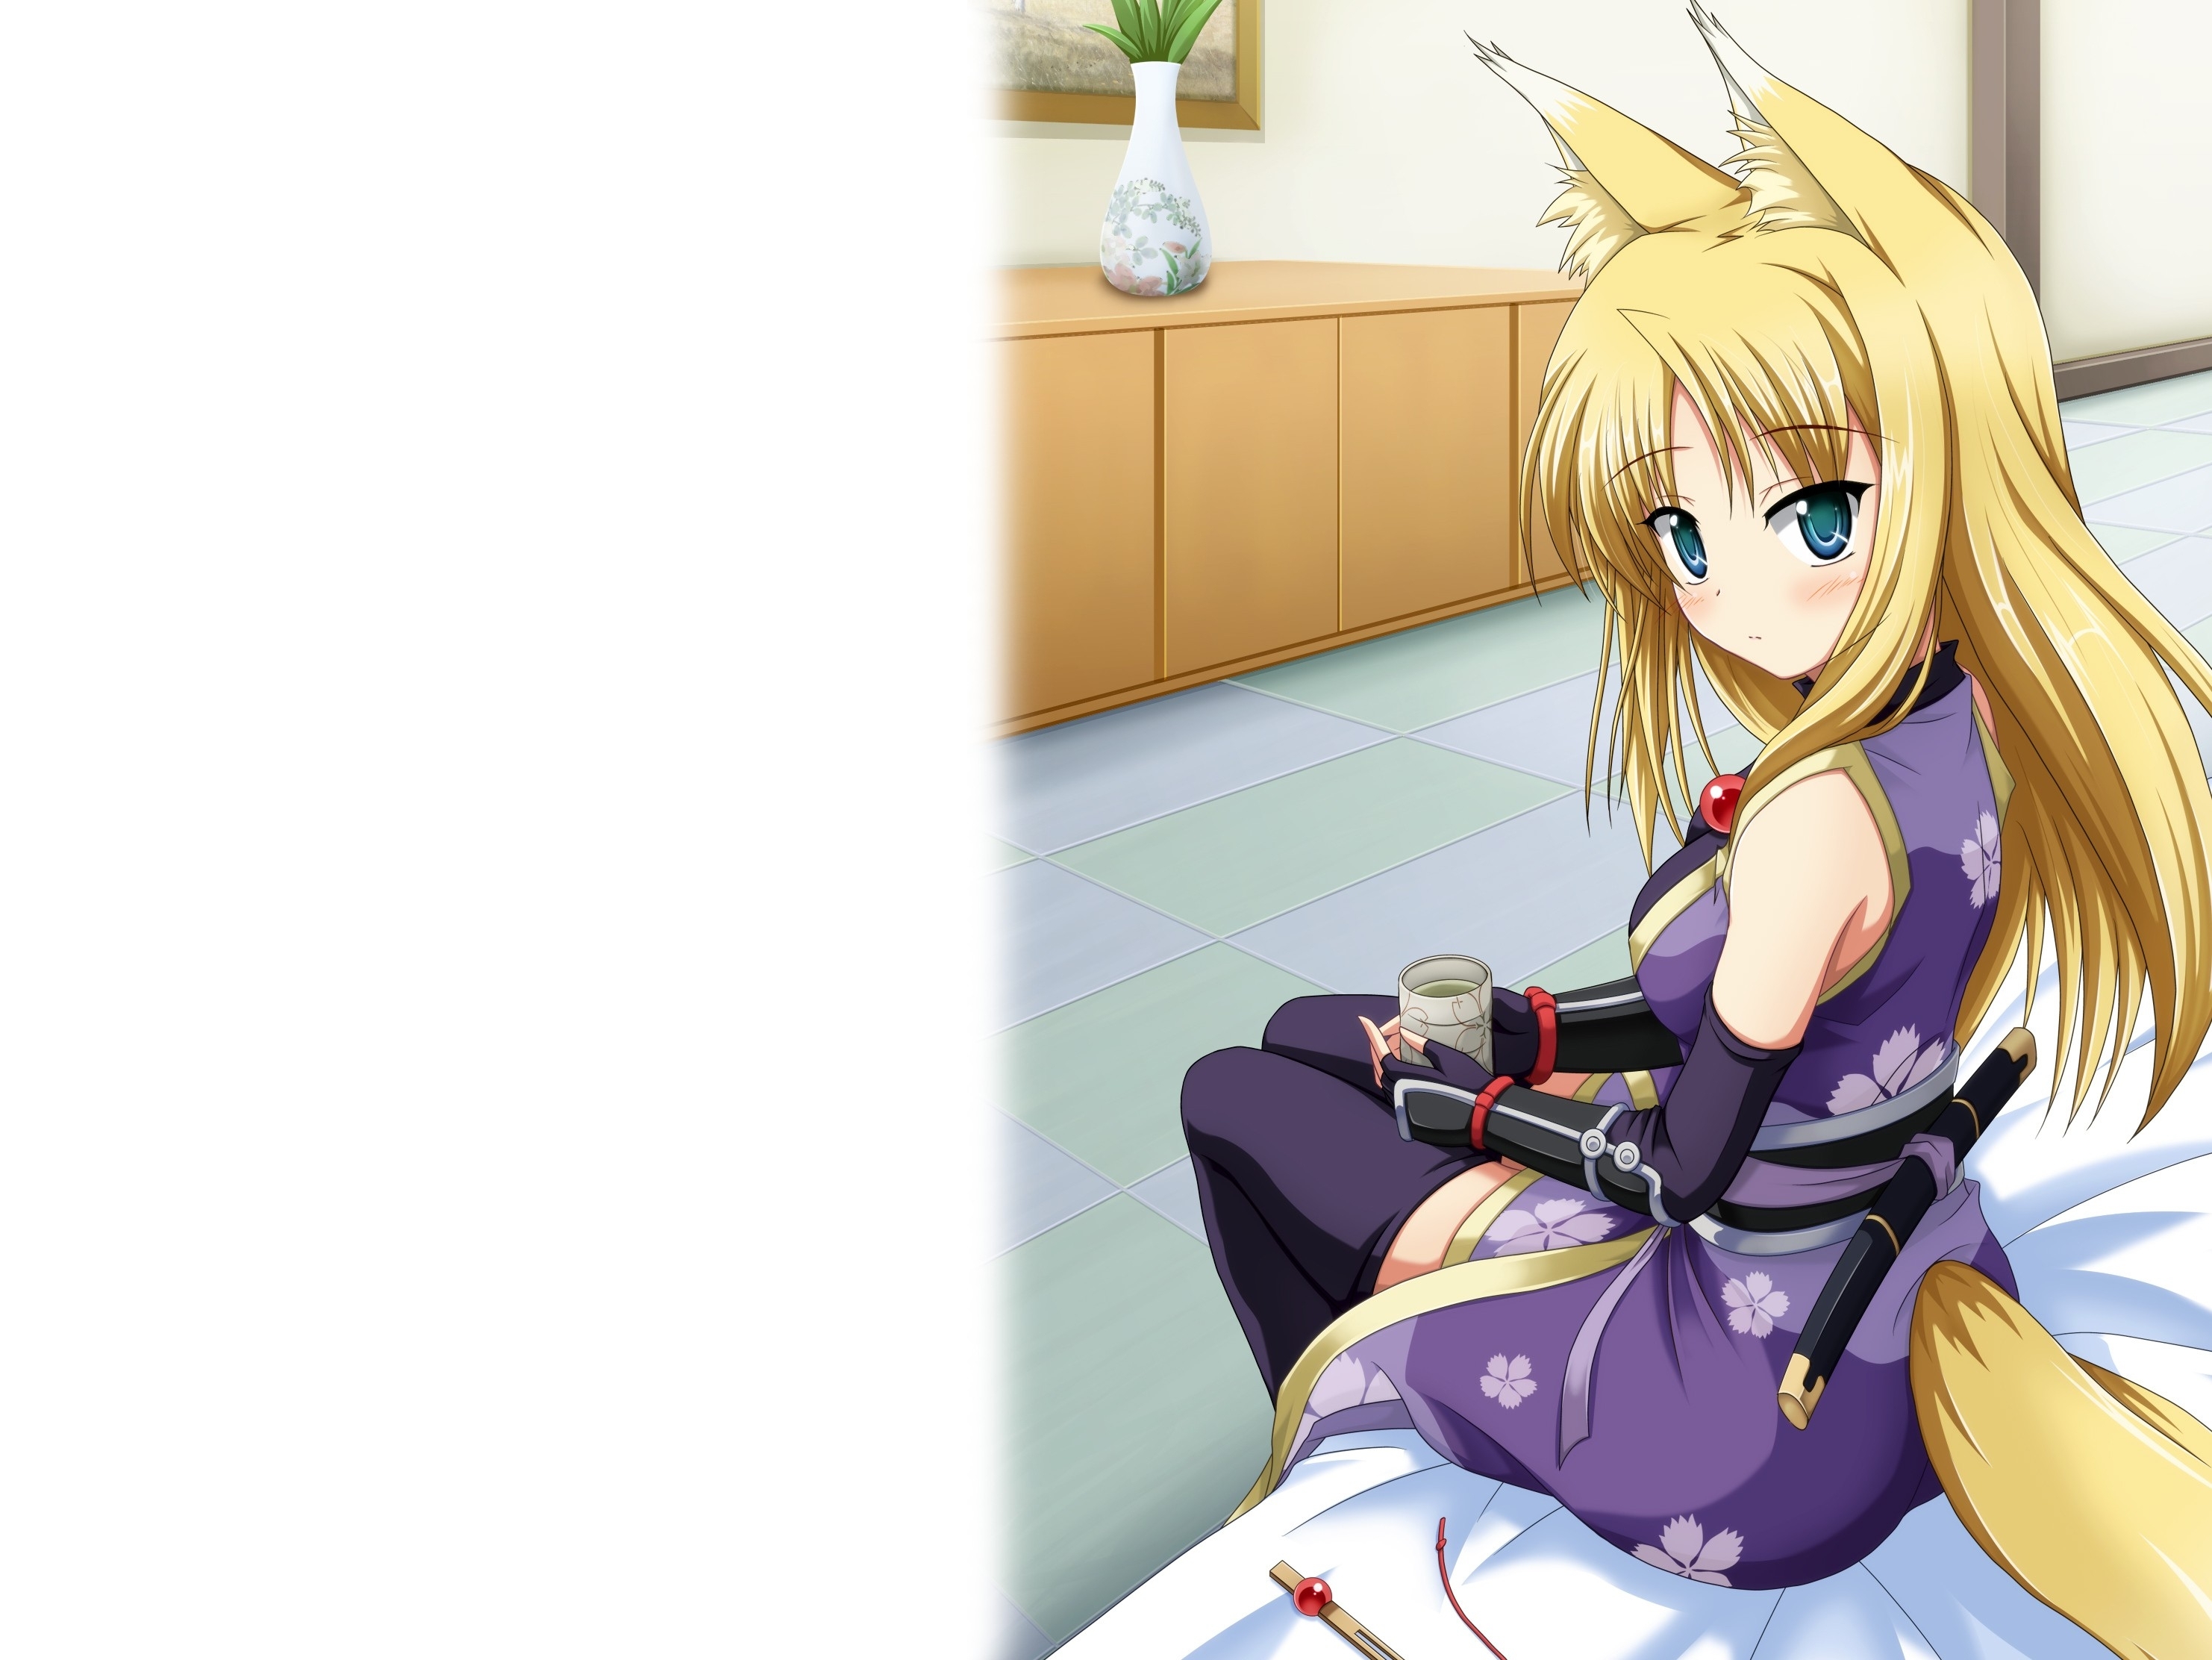 Download 2964x2224 Blondes gloves katana beds long hair weapons